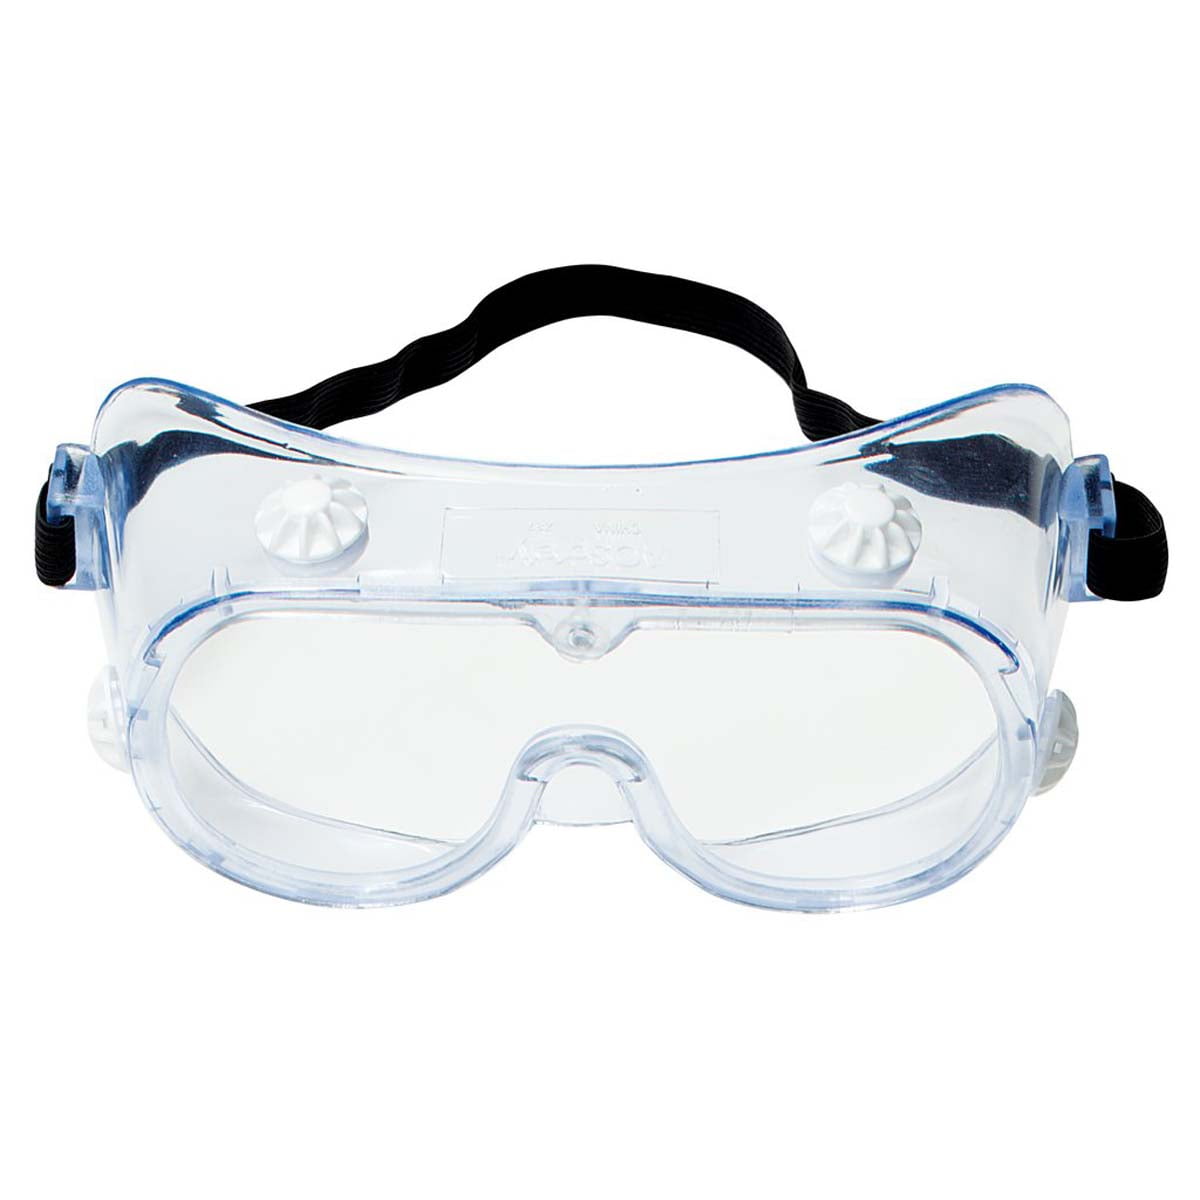 3M 334 Splash Safety Goggles 40660-00000-10, Clear Lens,